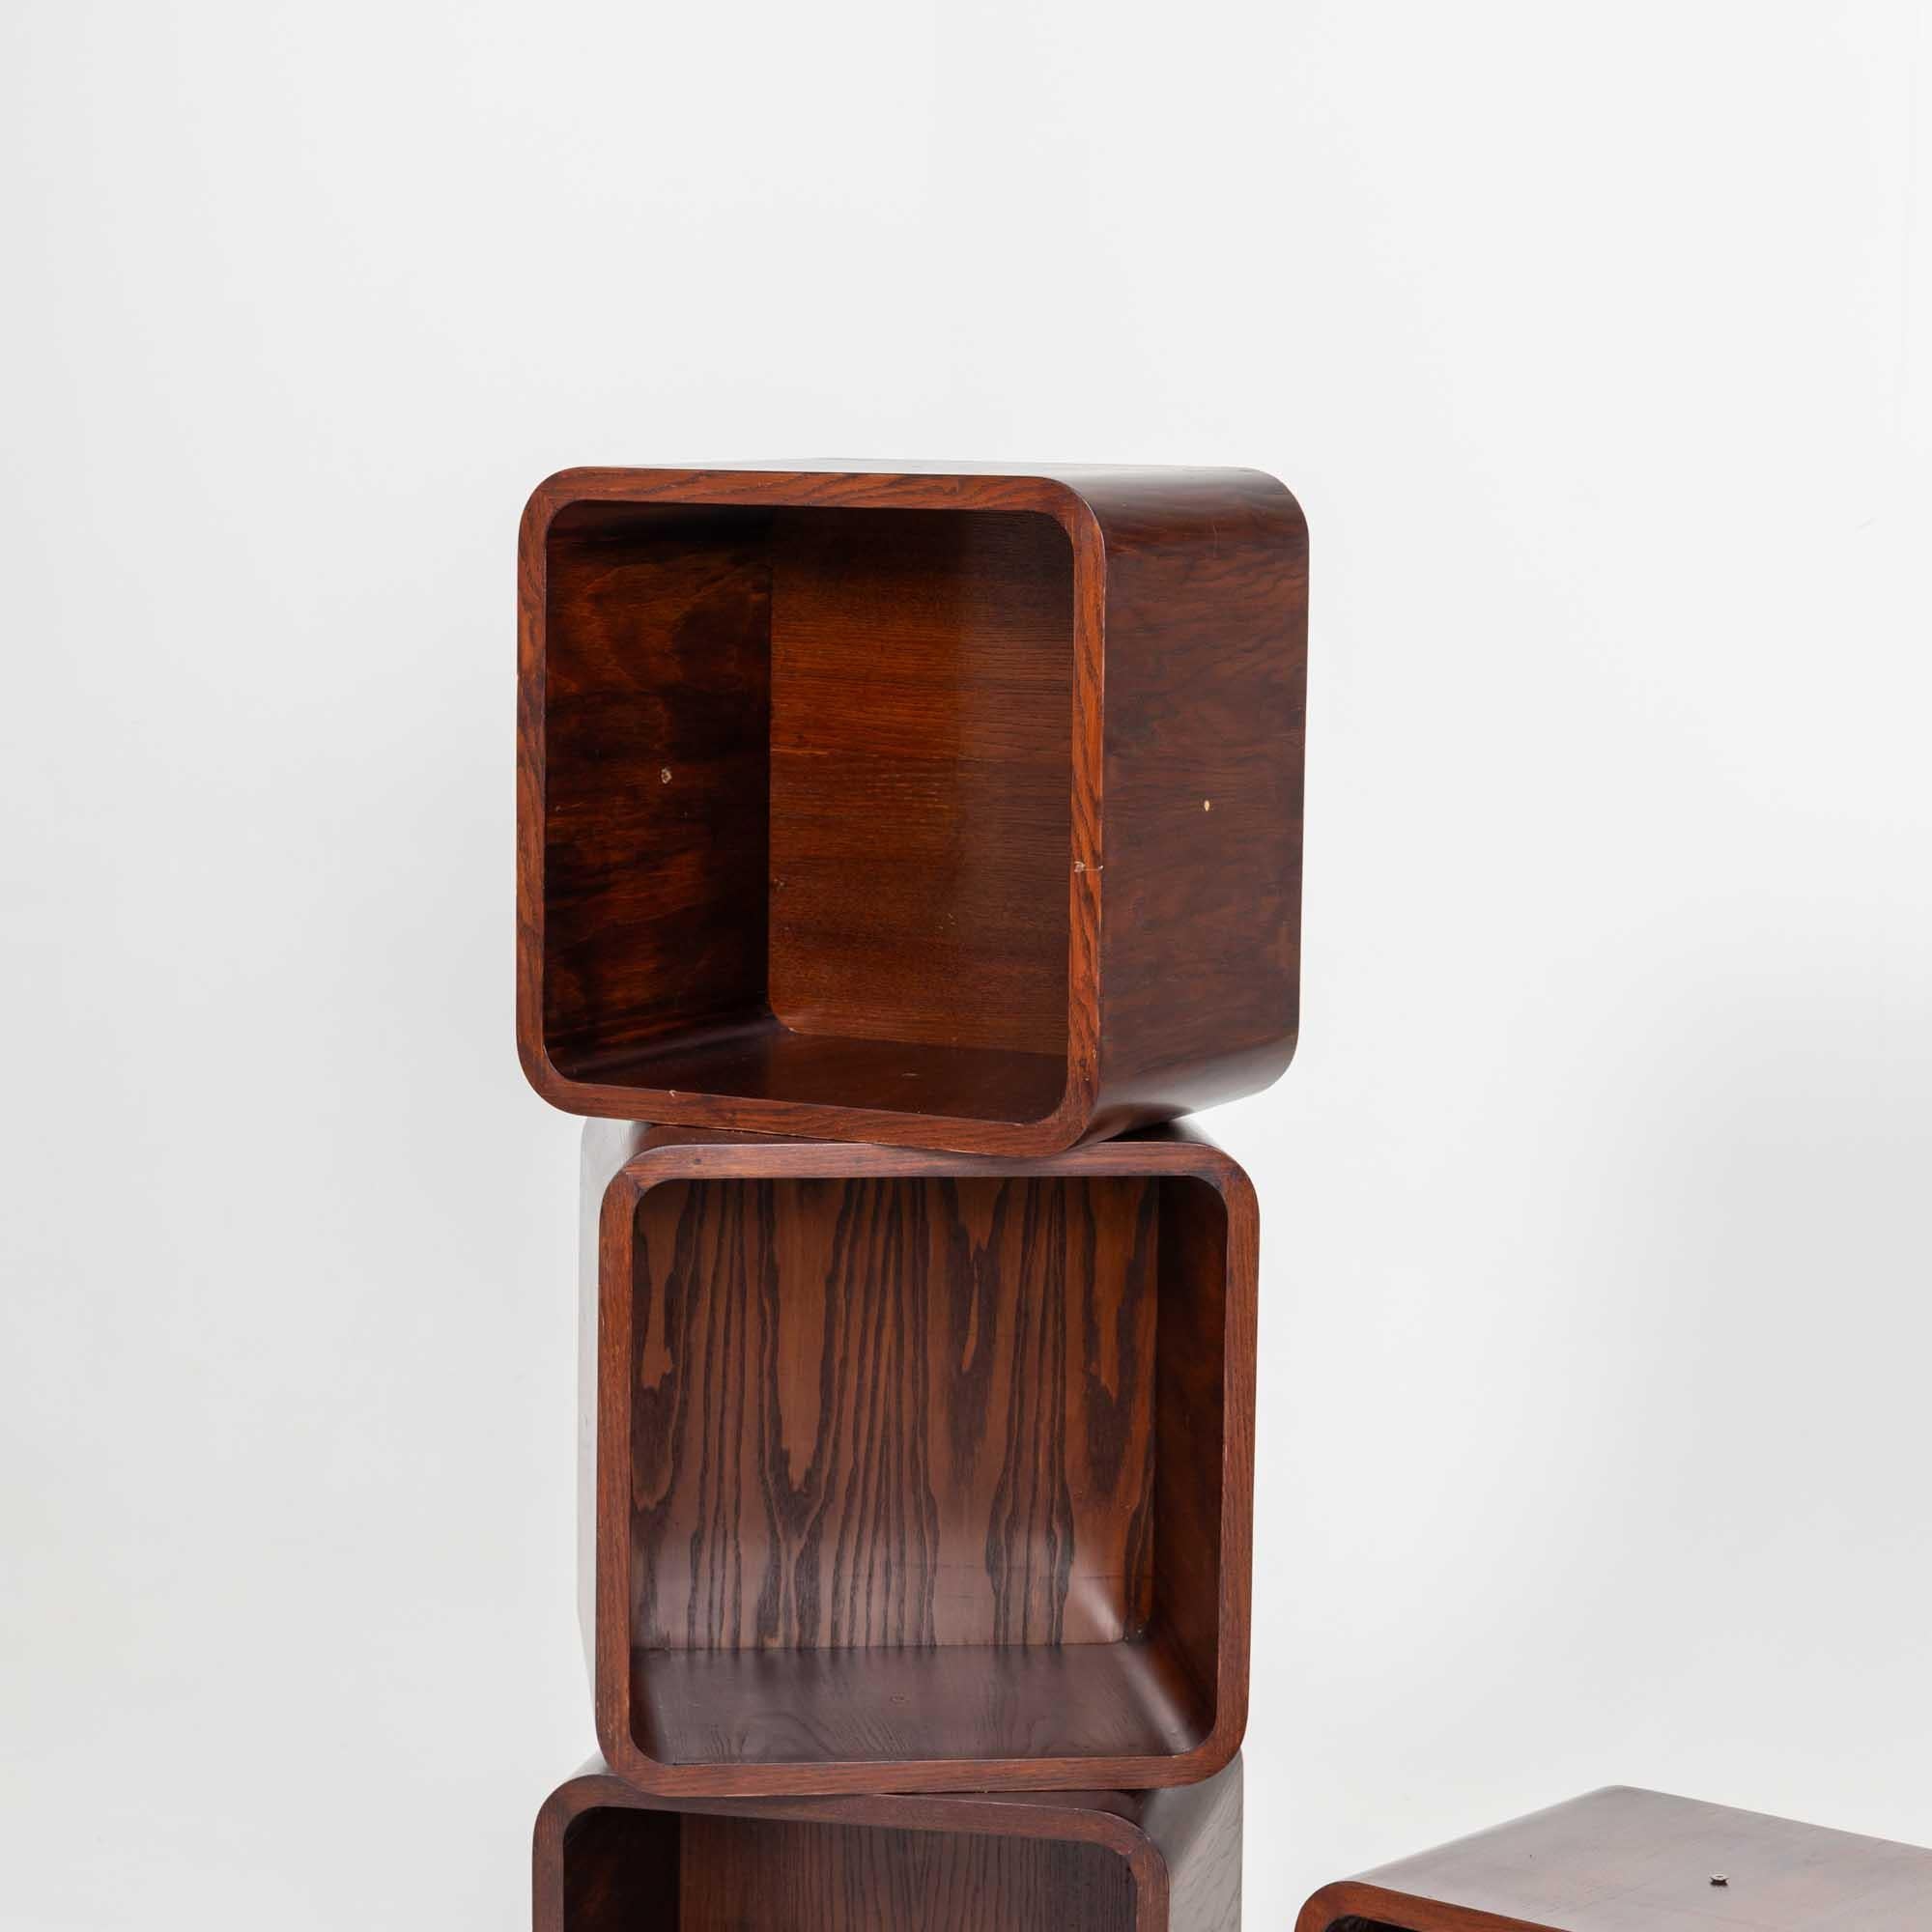 Set of four cube-shaped shelf elements that can be combined as desired. The elements are stained dark brown and are connected to each other by means of screws.